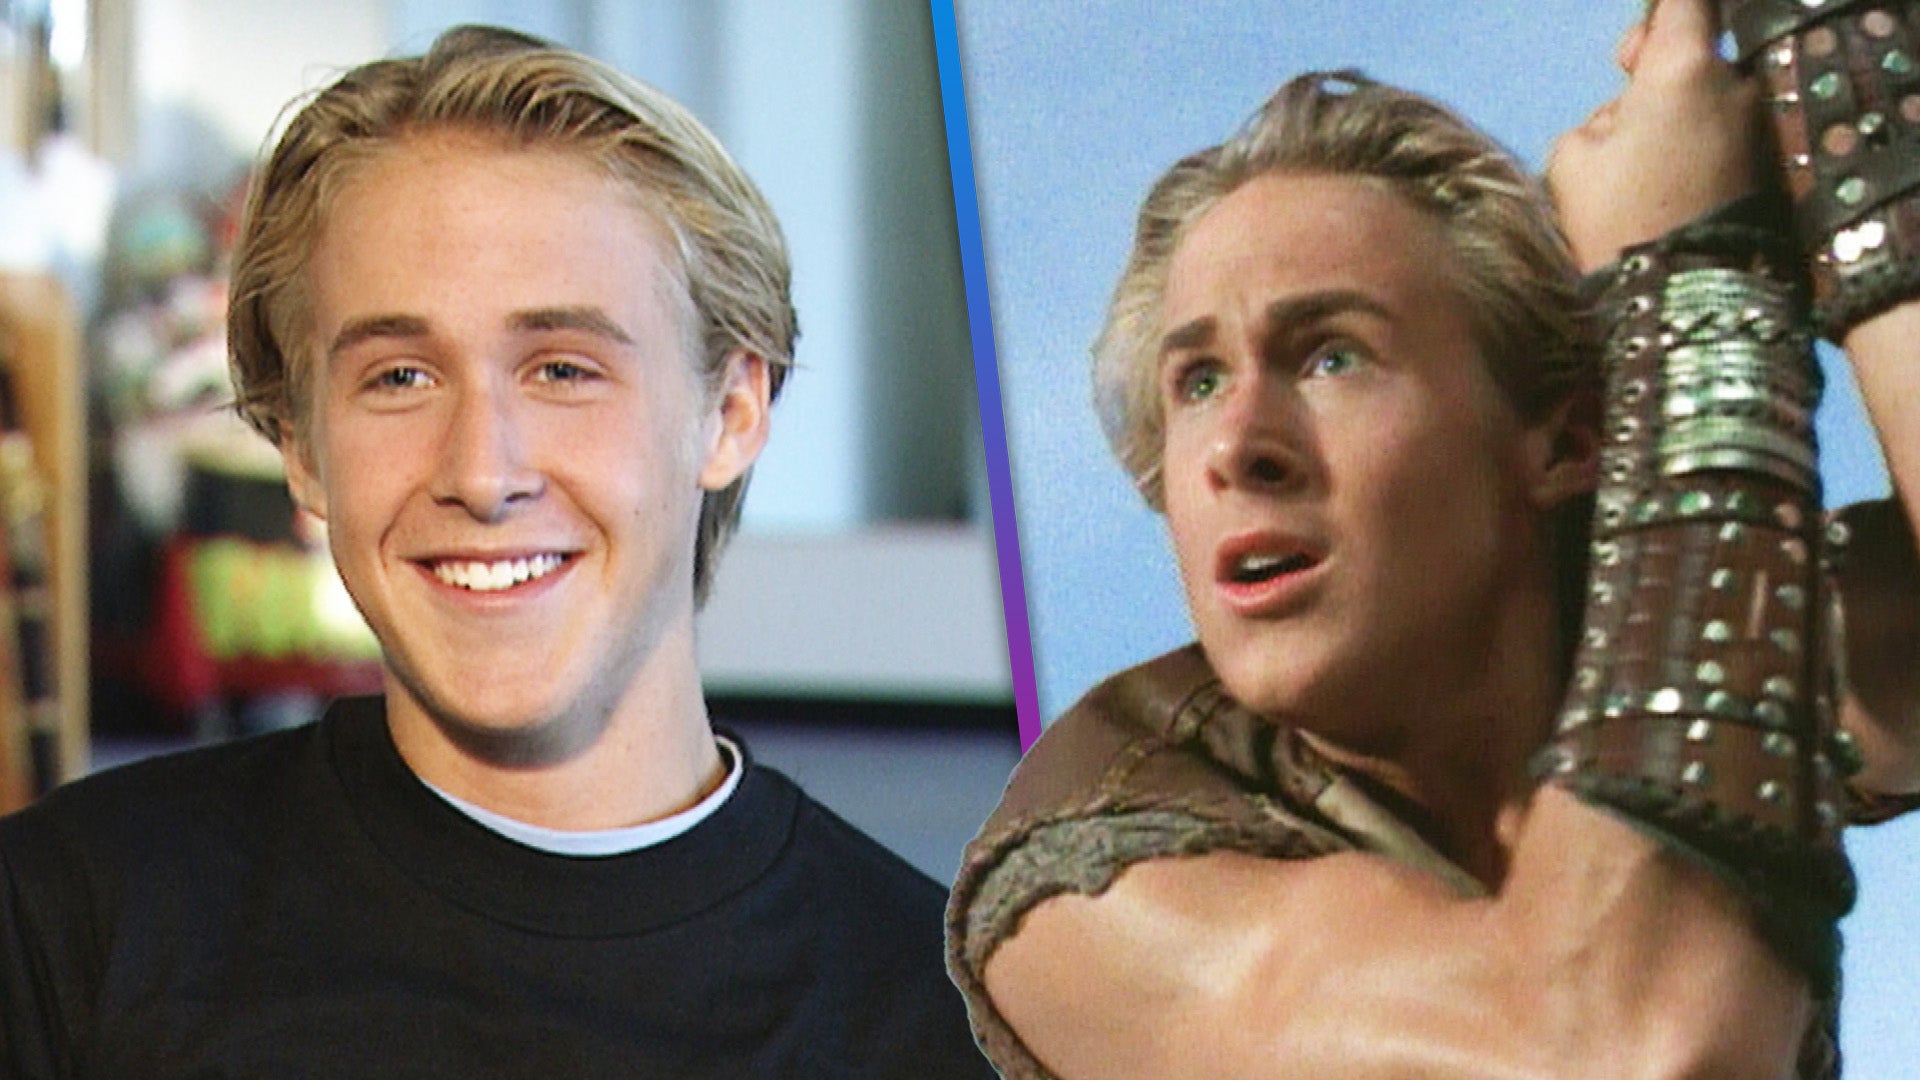 Watch Ryan Gosling's First ET Interview About Playing 'Young Hercules' (Flashback)